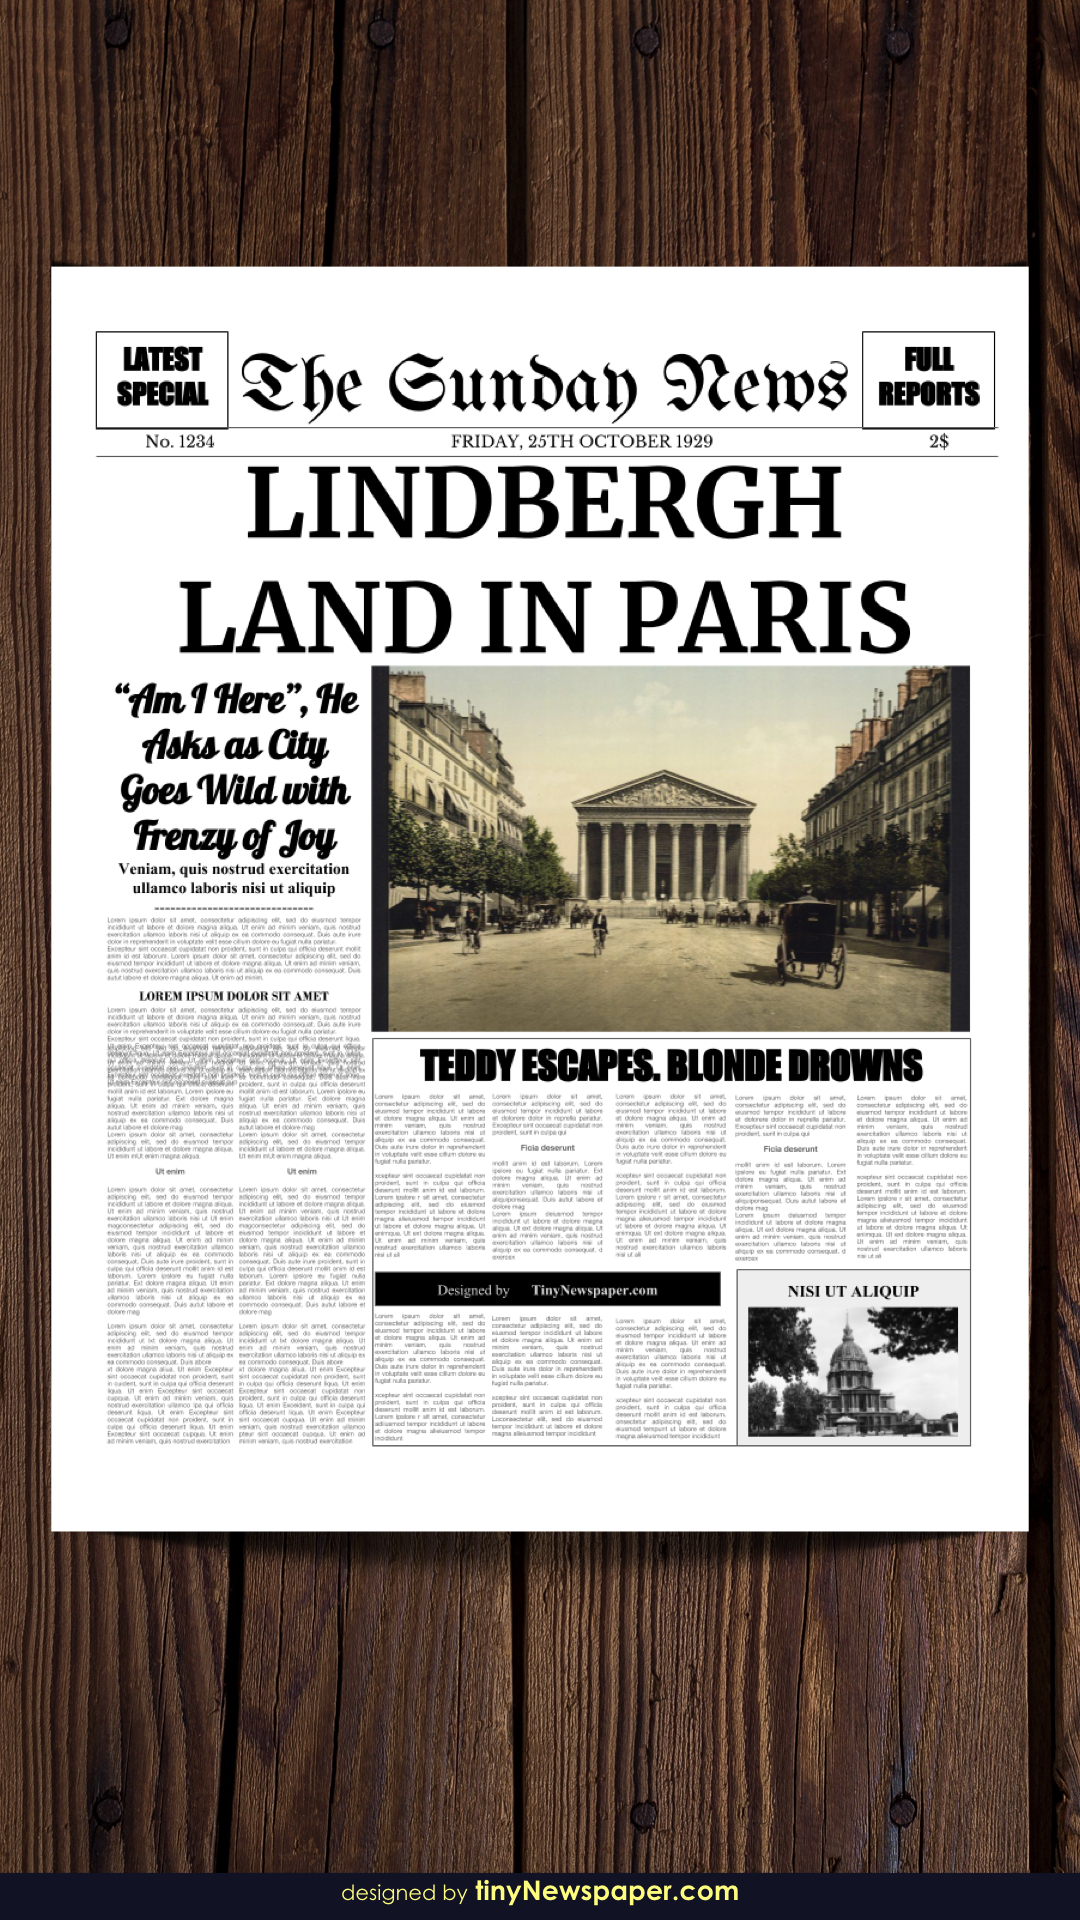 Powerpoint Newspaper Template Within Newspaper Template For Powerpoint